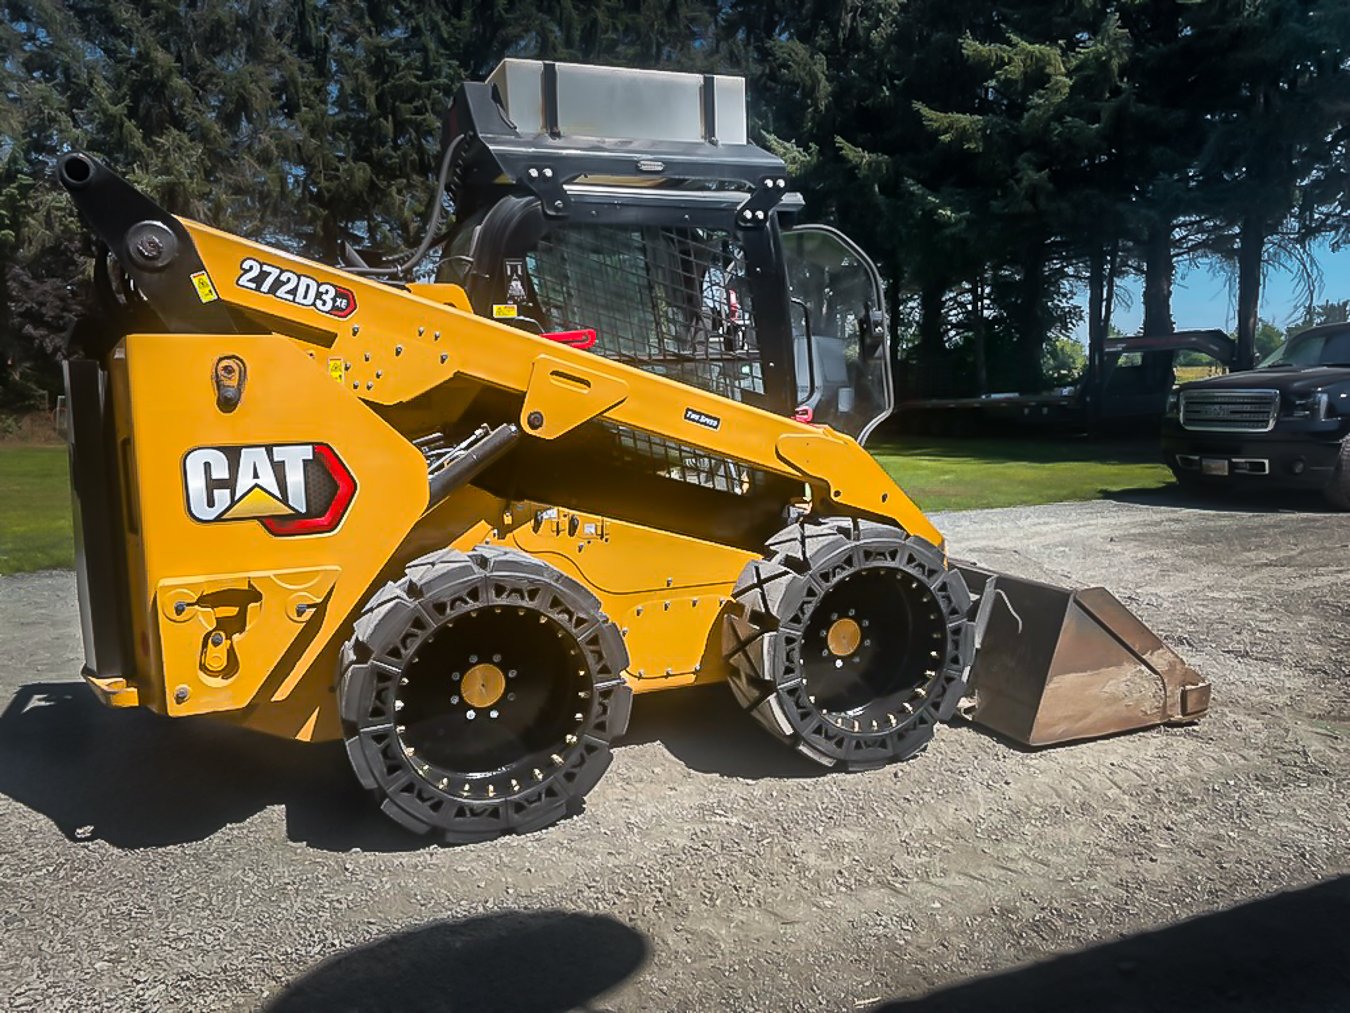 This images shows a CAT 272D3 HS with our EWRS HS flat free skid steer tires